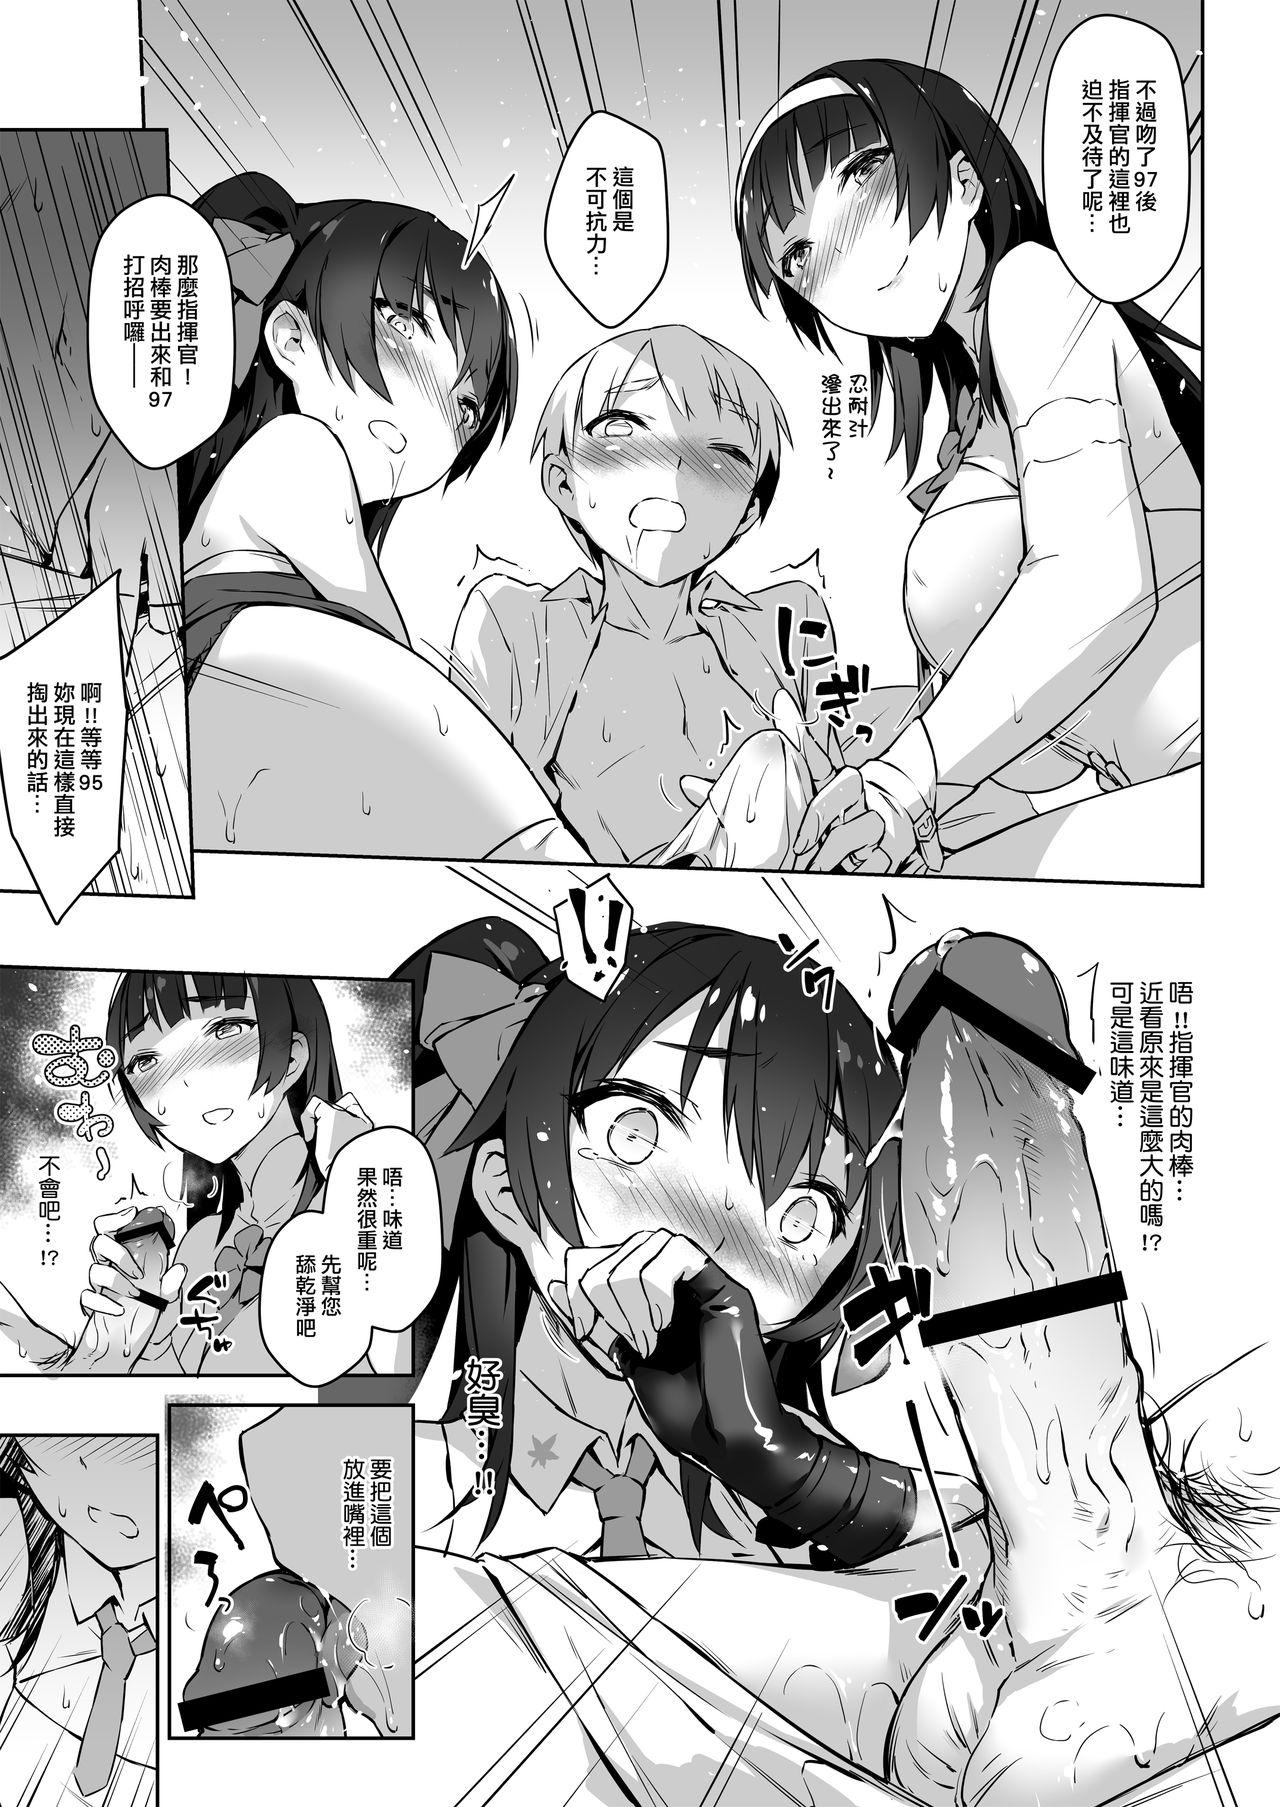 Cuzinho Type 95 Type 97, Let Sister Teaches You!! - Girls frontline Big Natural Tits - Page 11